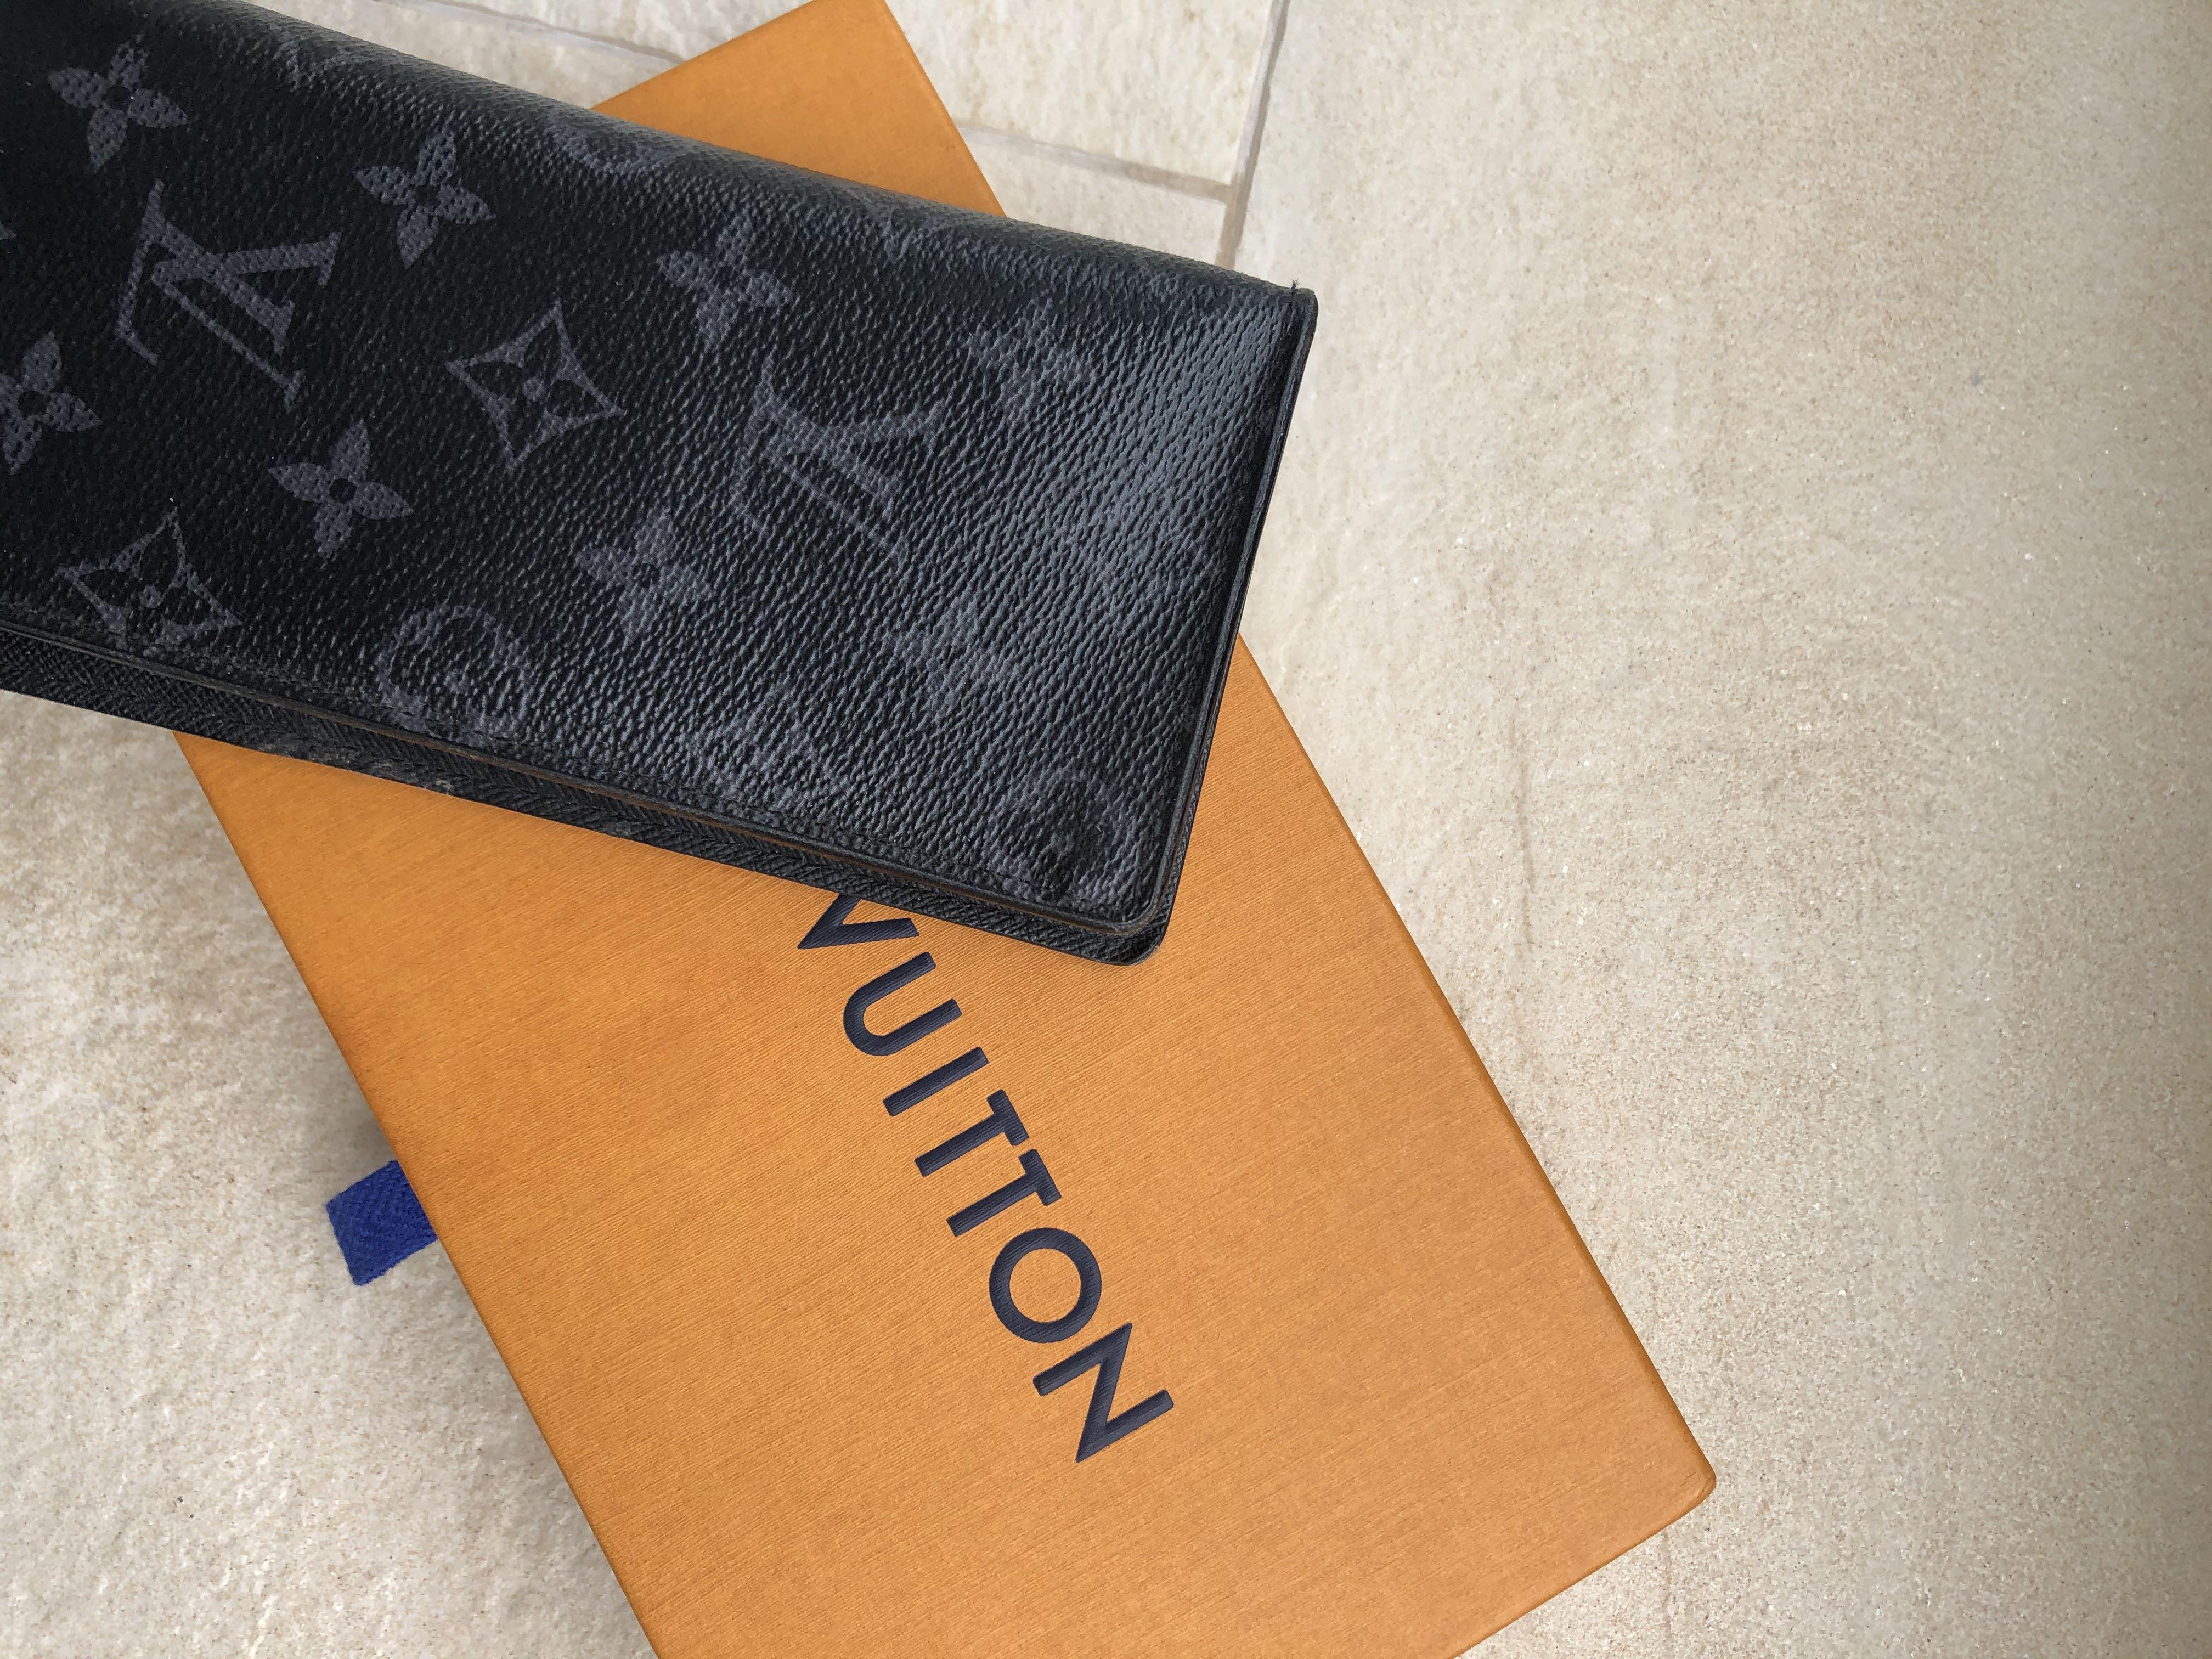 Shop Louis Vuitton BRAZZA 2021 SS New Long Wallet (M81810, M69980) by  sweetピヨ